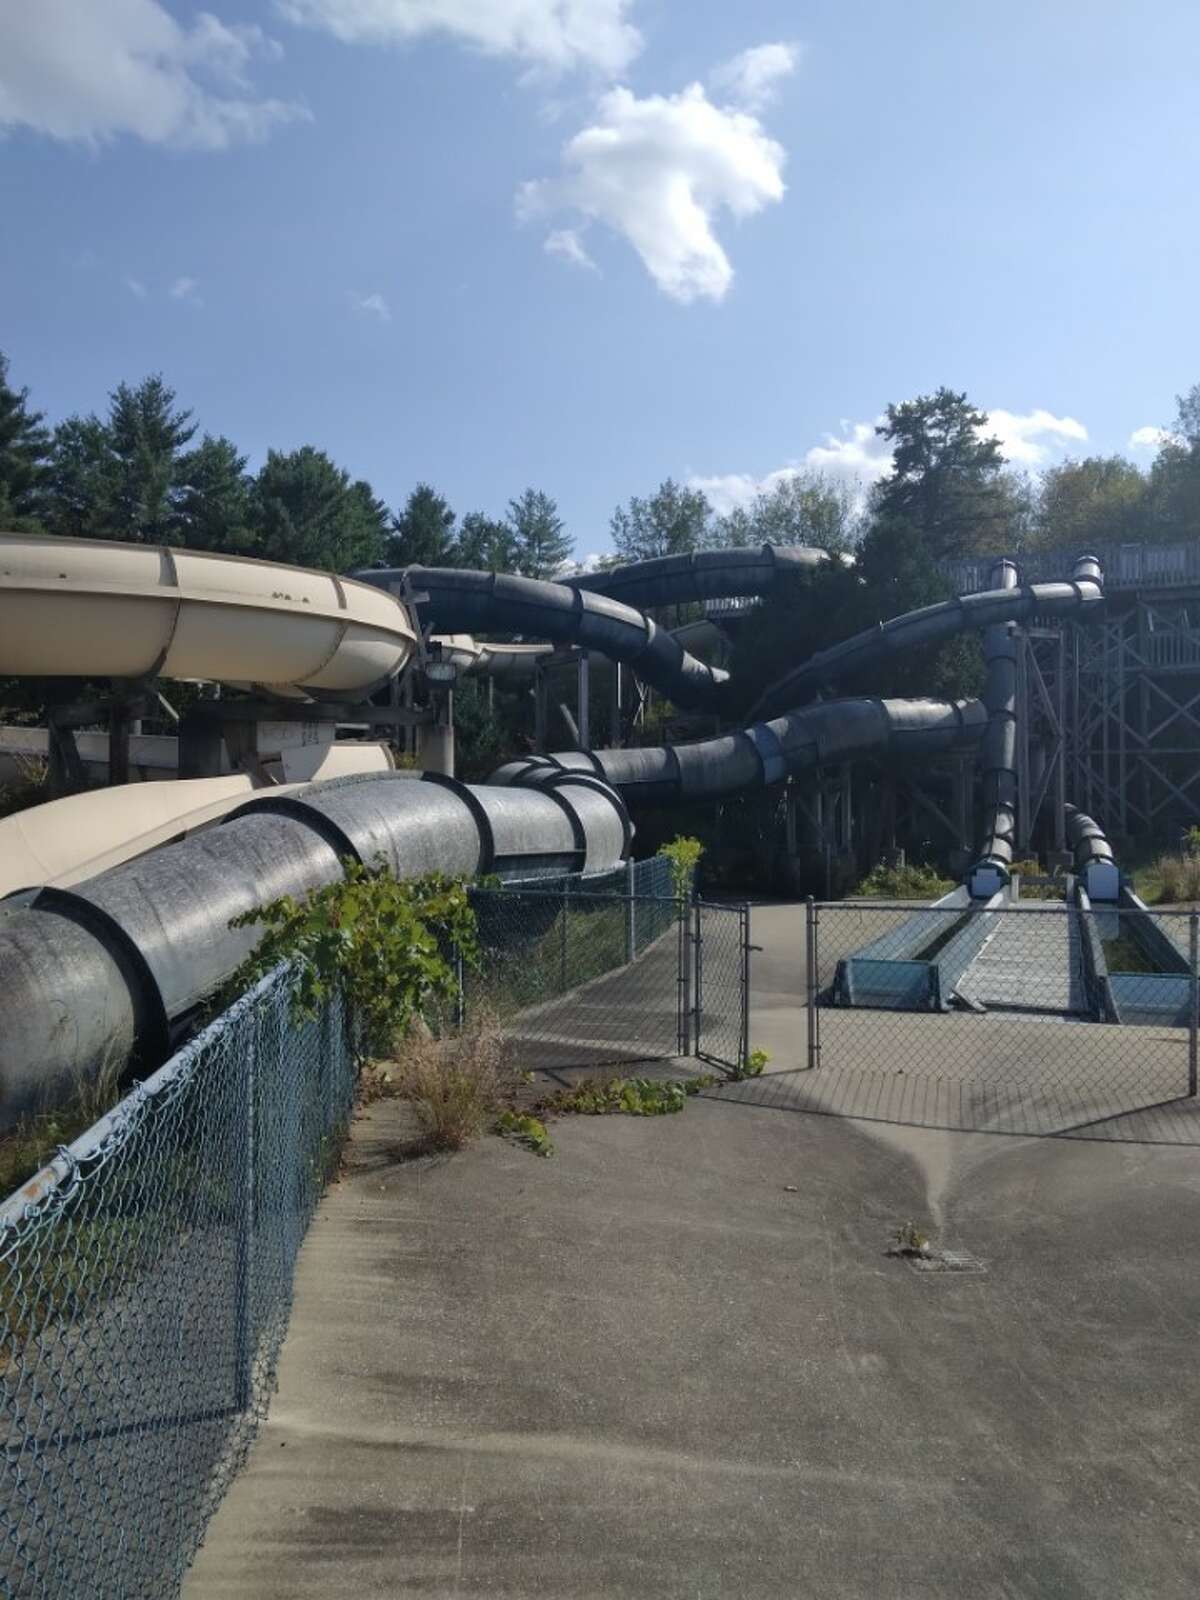 Eight of Water Slide World's popular slides are now for sale on Facebook Marketplace. 